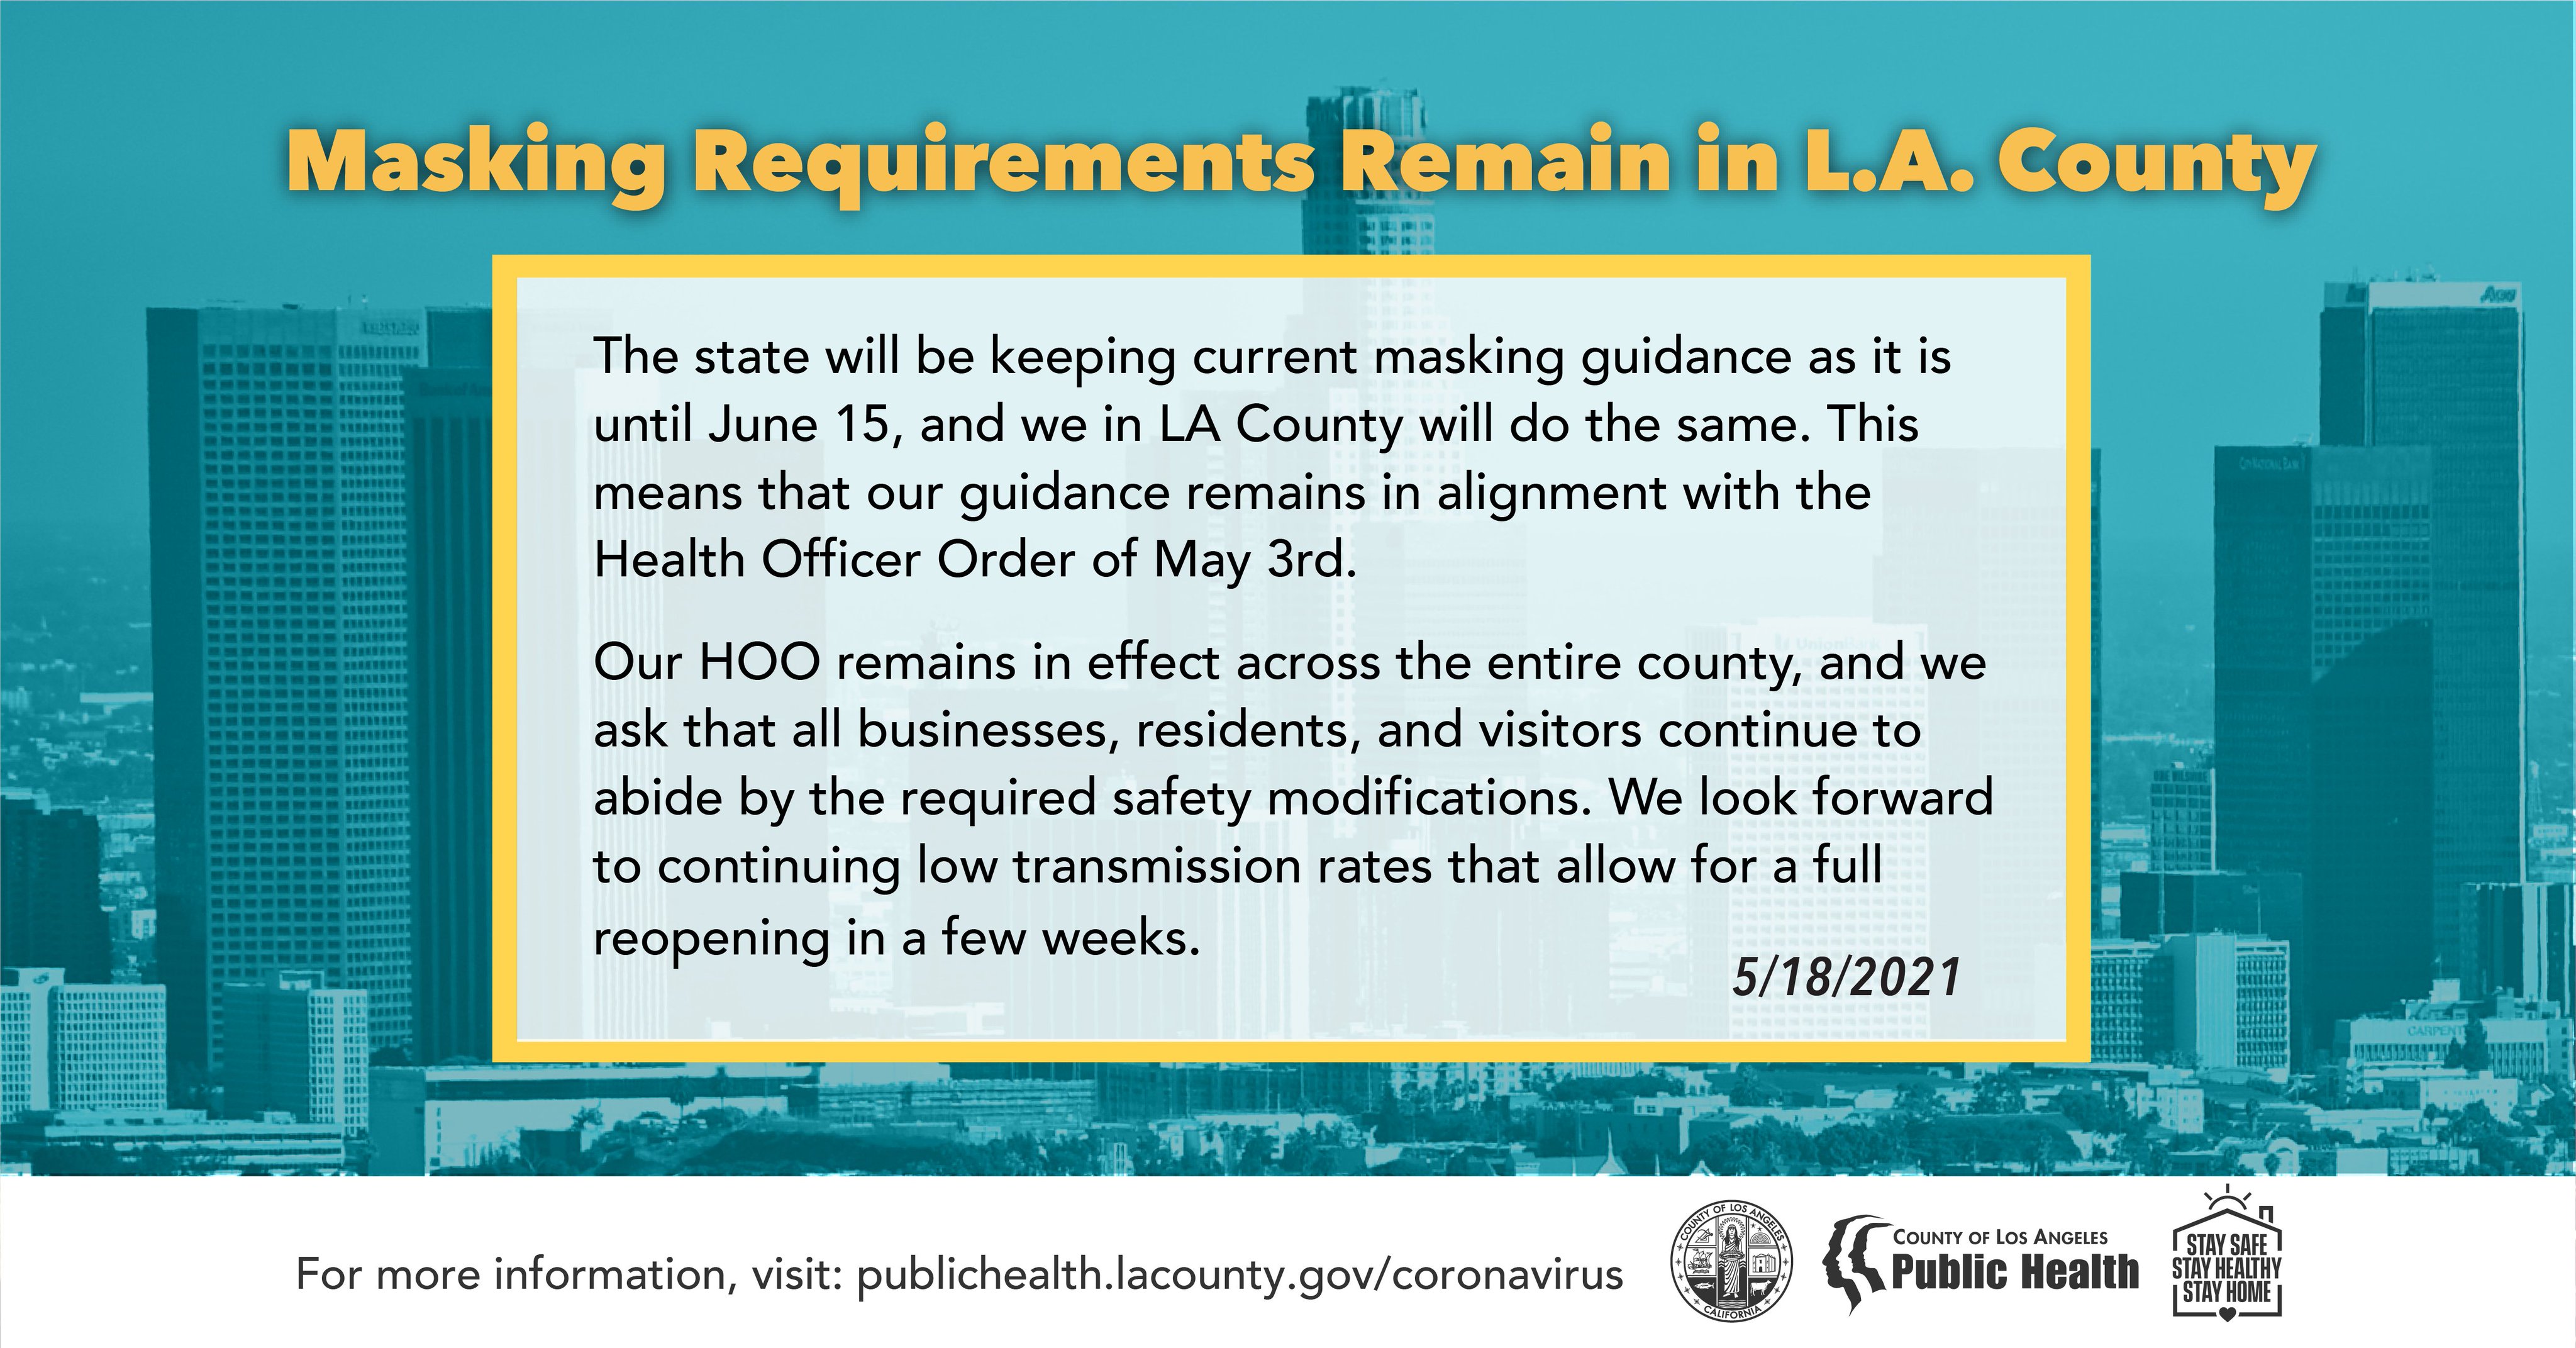 Masking Requirements Remain in LA County